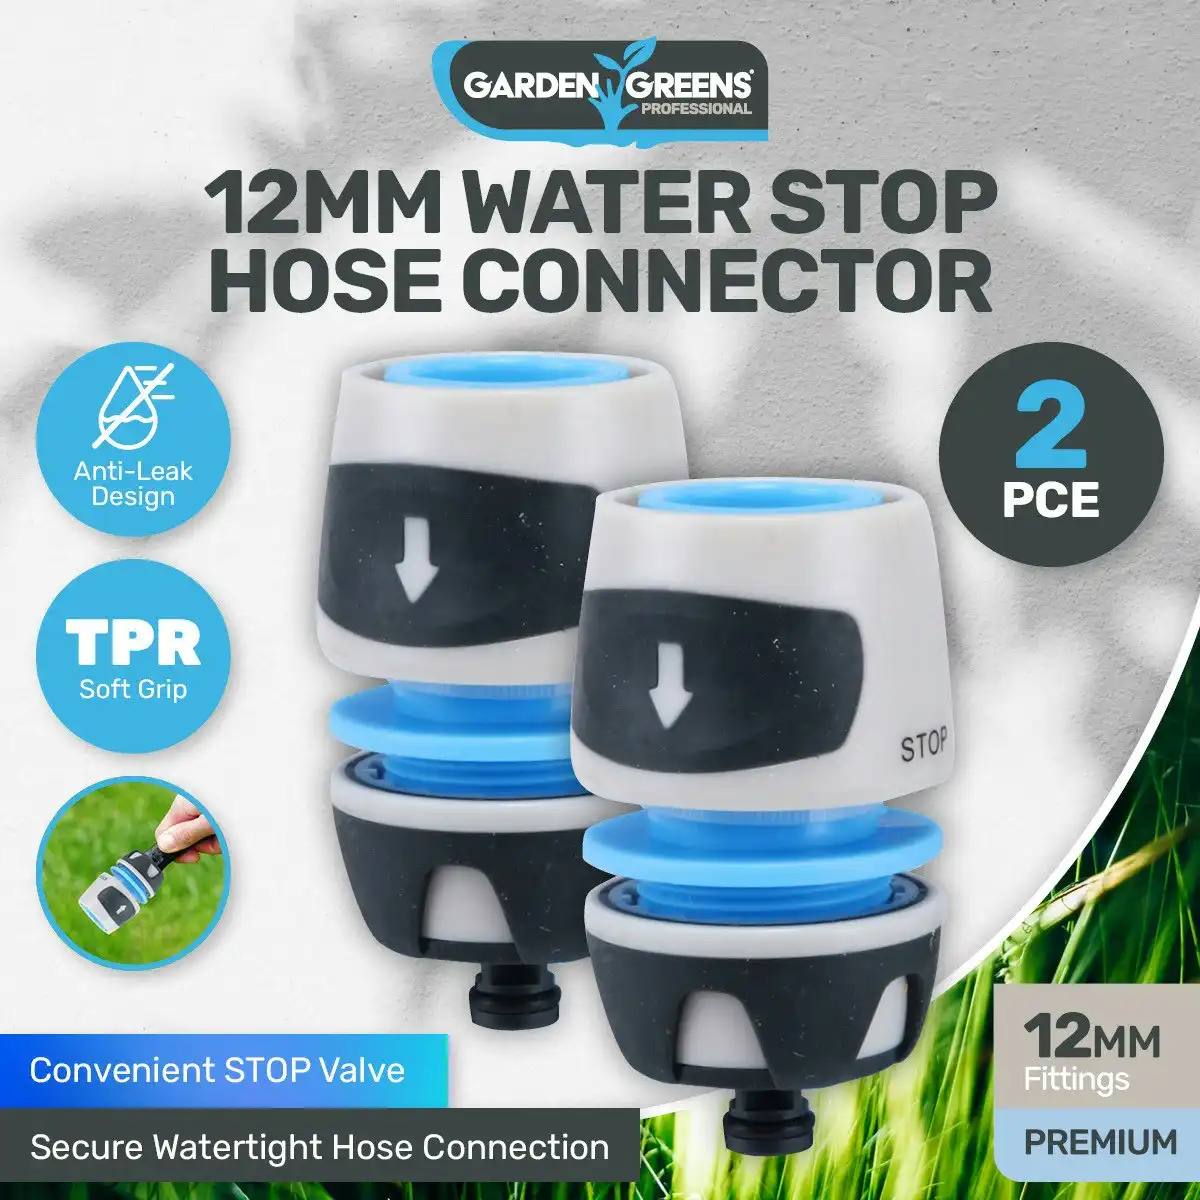 Garden Greens 2PCE Hose Connector With Handy Stop Valve Premium Quality 12mm